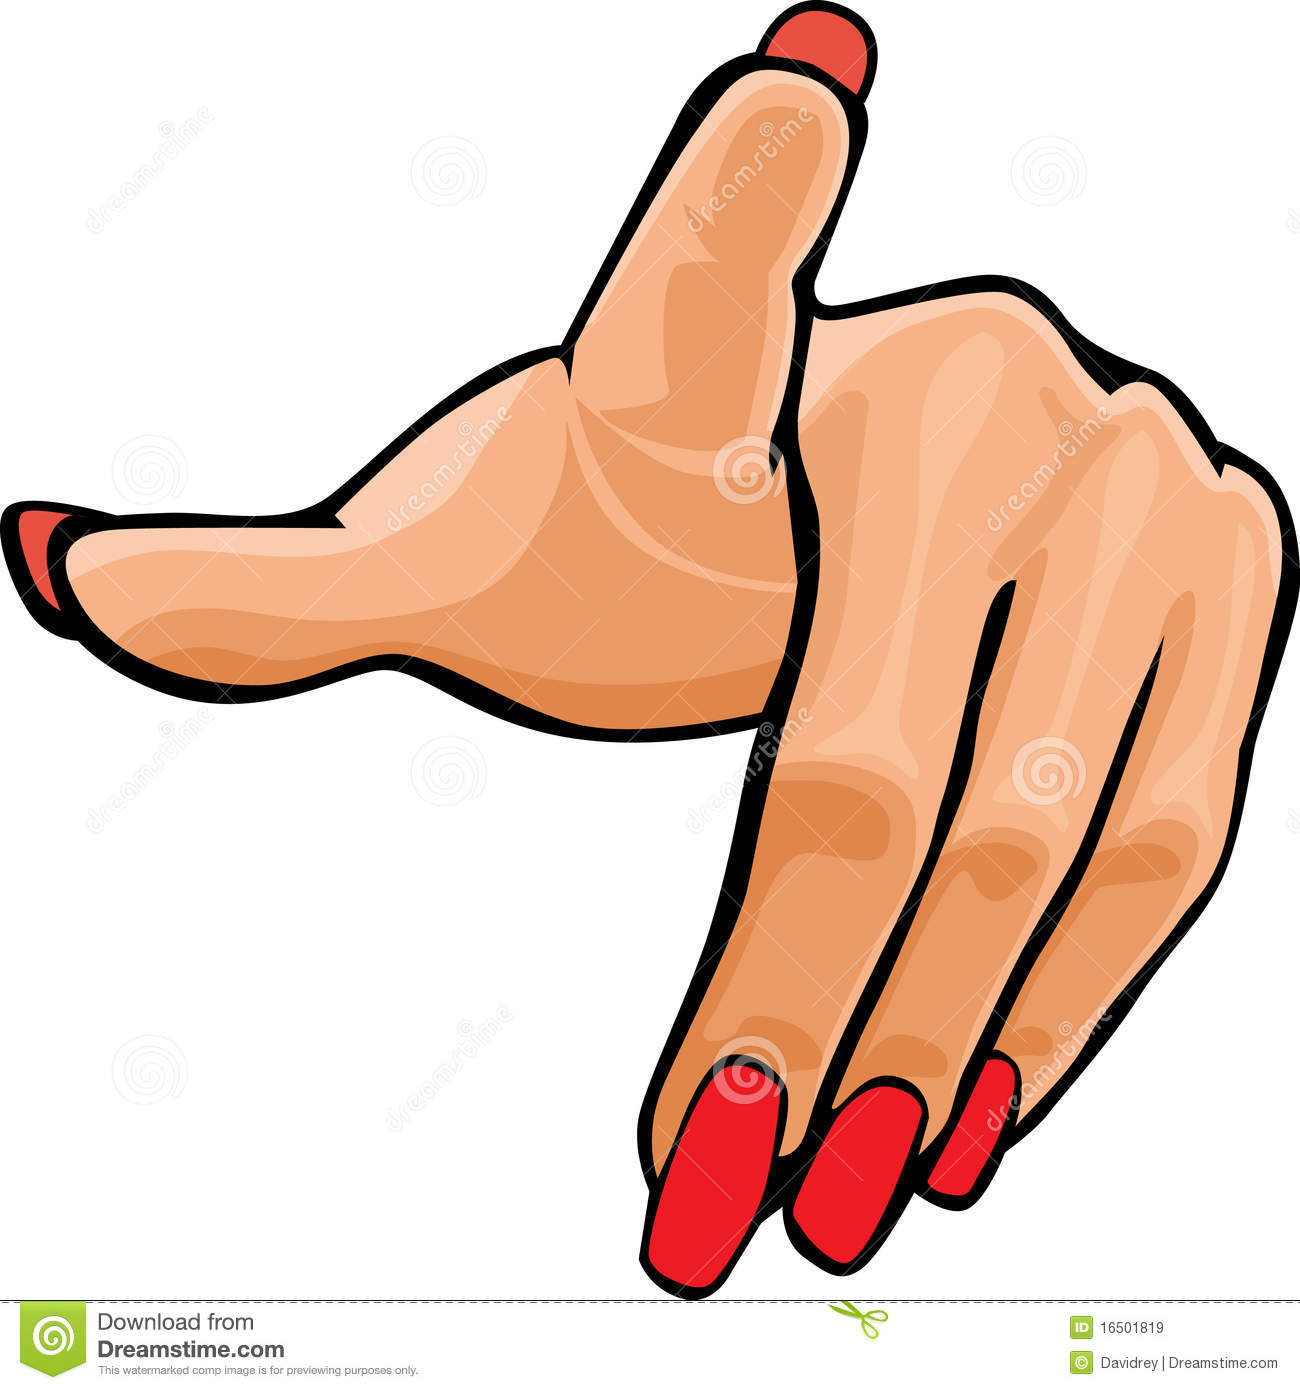 Clip Art Illustration Of A Woman S Hand Pointing Out